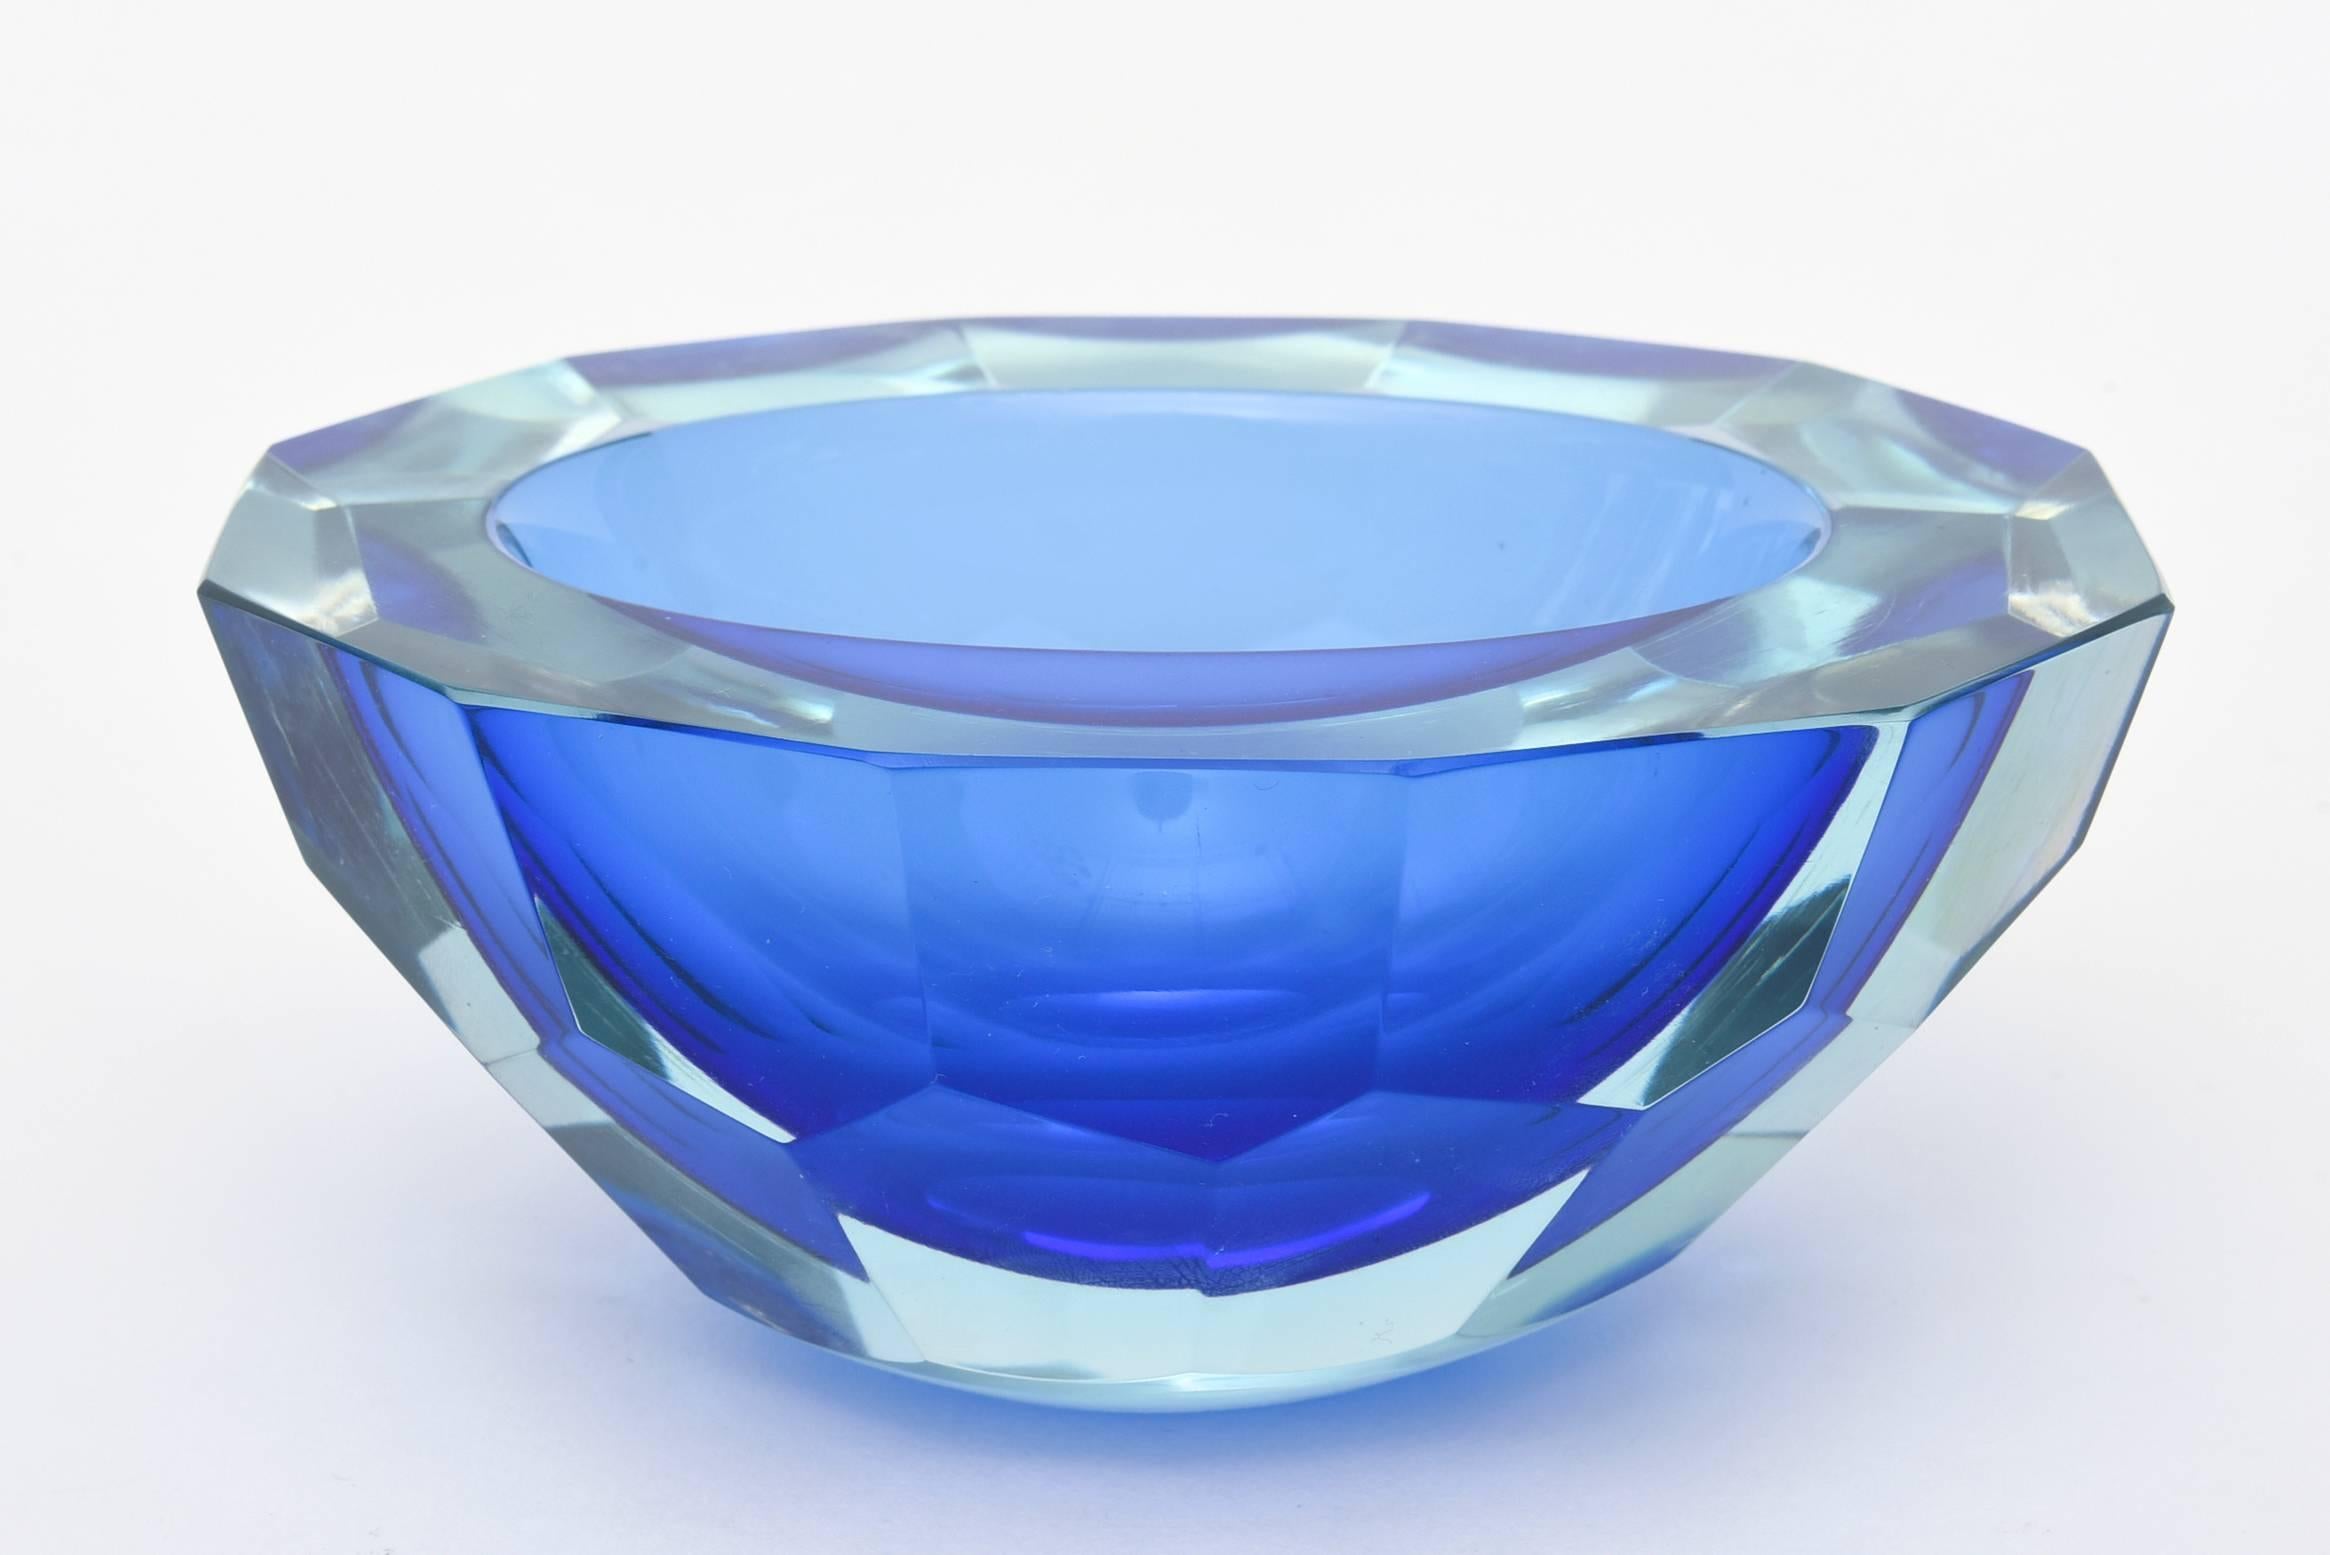 This stunning and heavy Italian Murano two-toned Sommerso glass geode bowl is like chilsed piece of sculpture in glass. It has the flat cut polished top and faceted exterior.
The play of the blues are luscious and the honeycomb pattern is